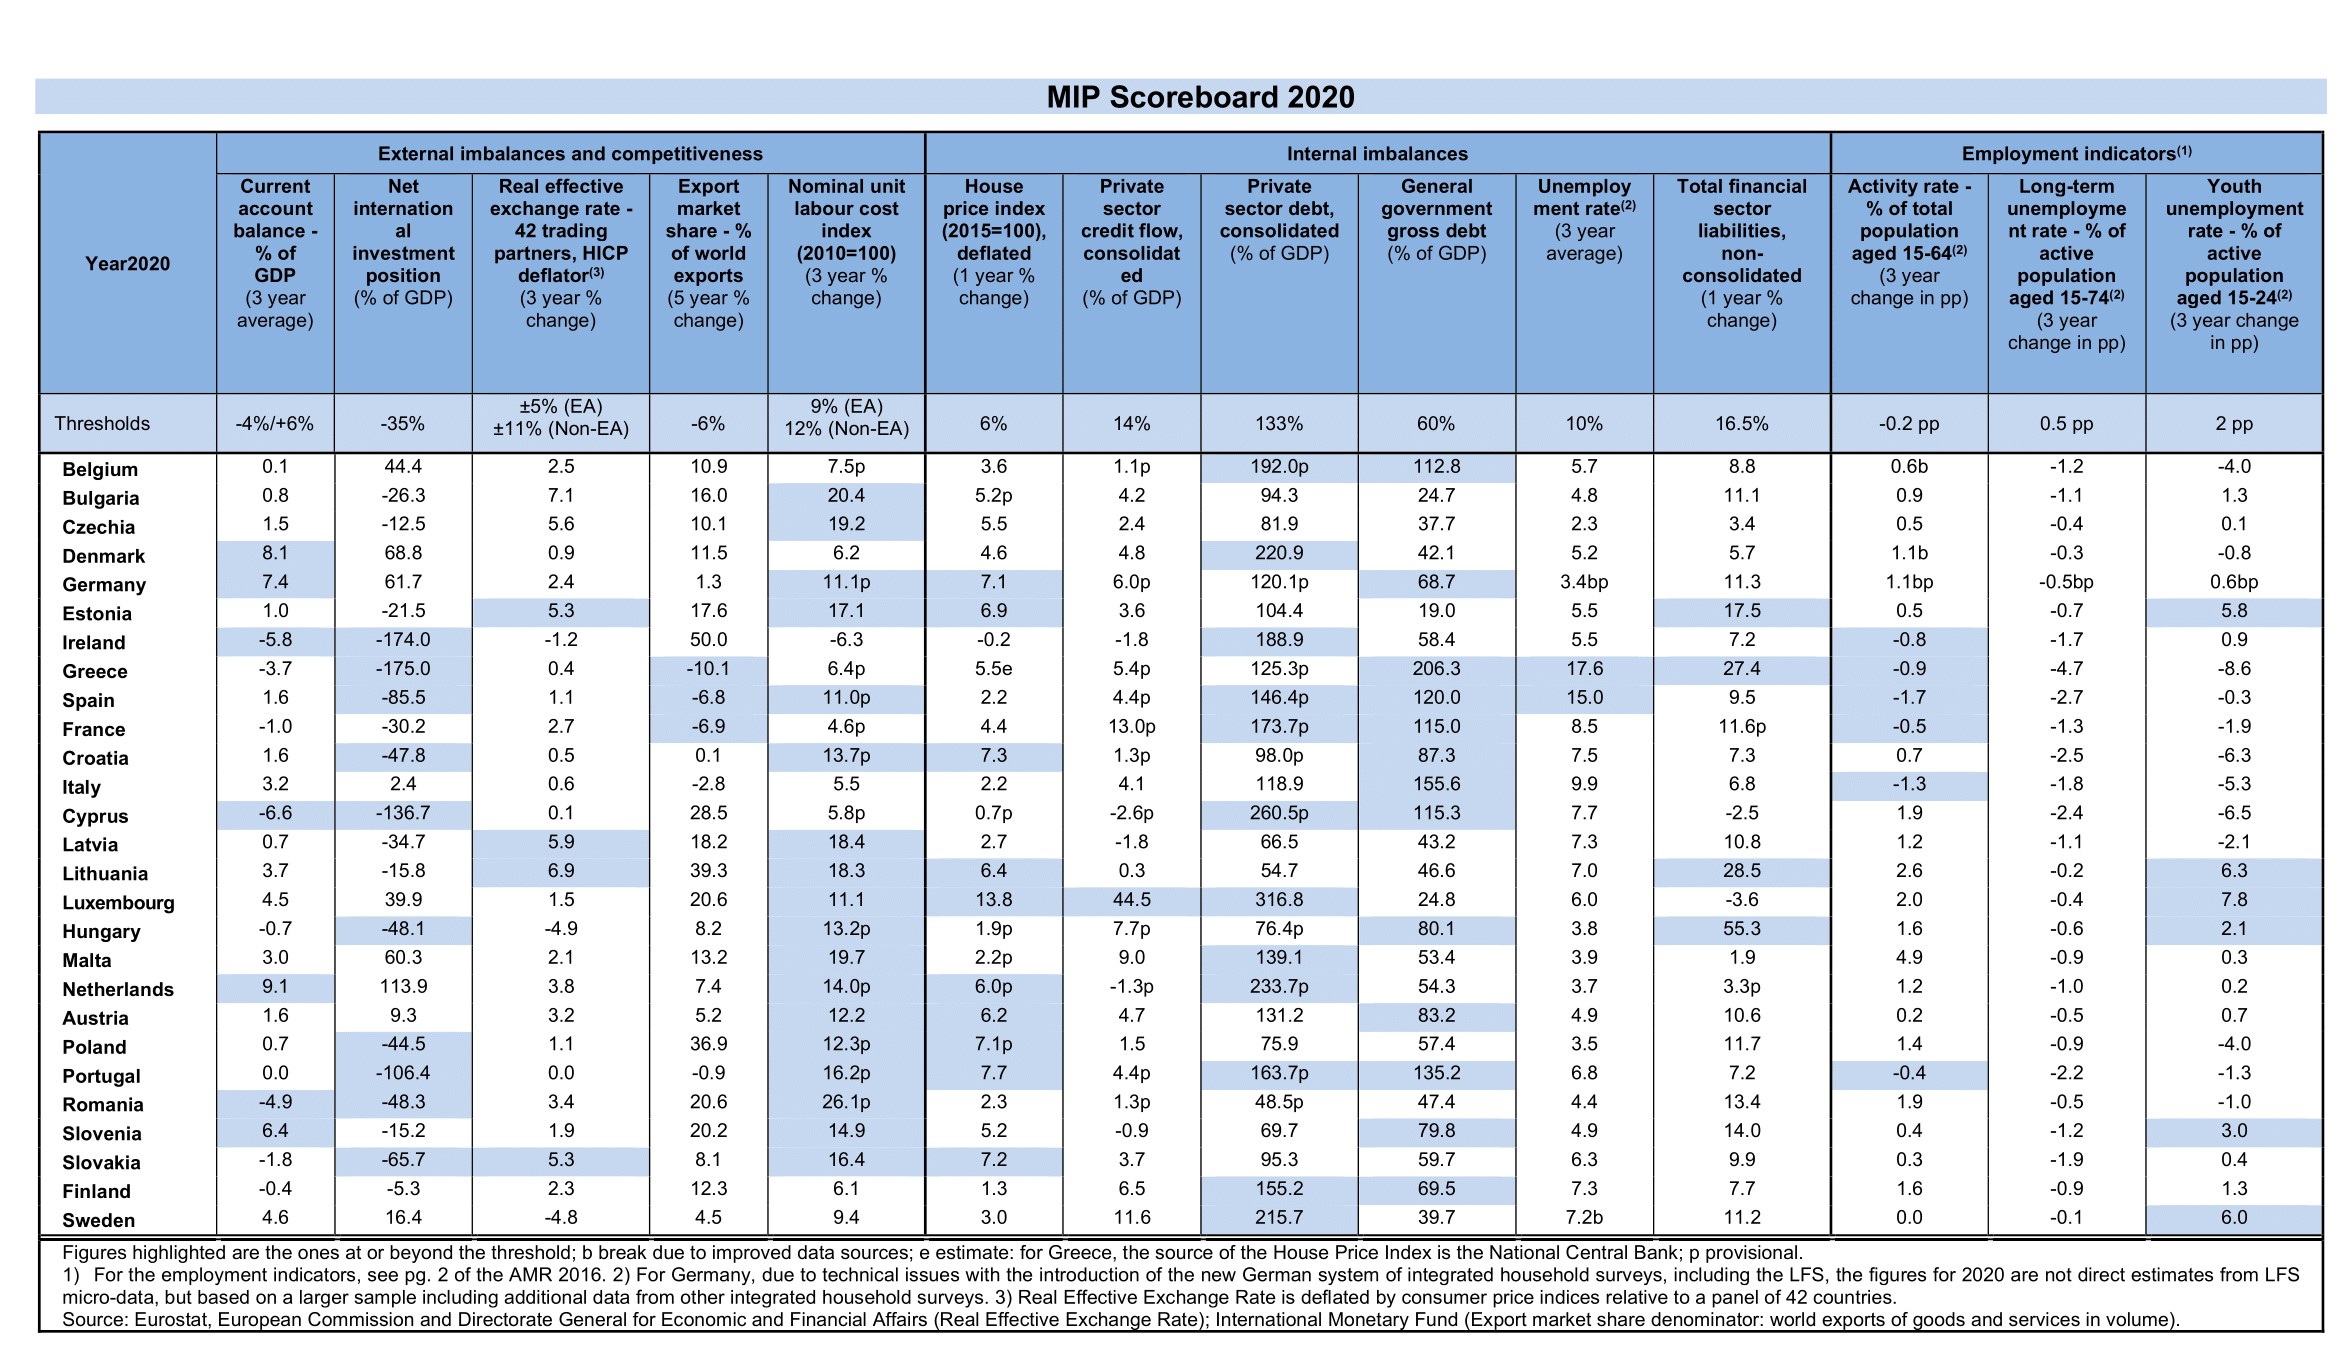 Table: MIP Scoreboard 2020, showing indicators for external imbalances and competitiveness, internal imbalances, and employment indicators for EU Member States and EFTA countries 